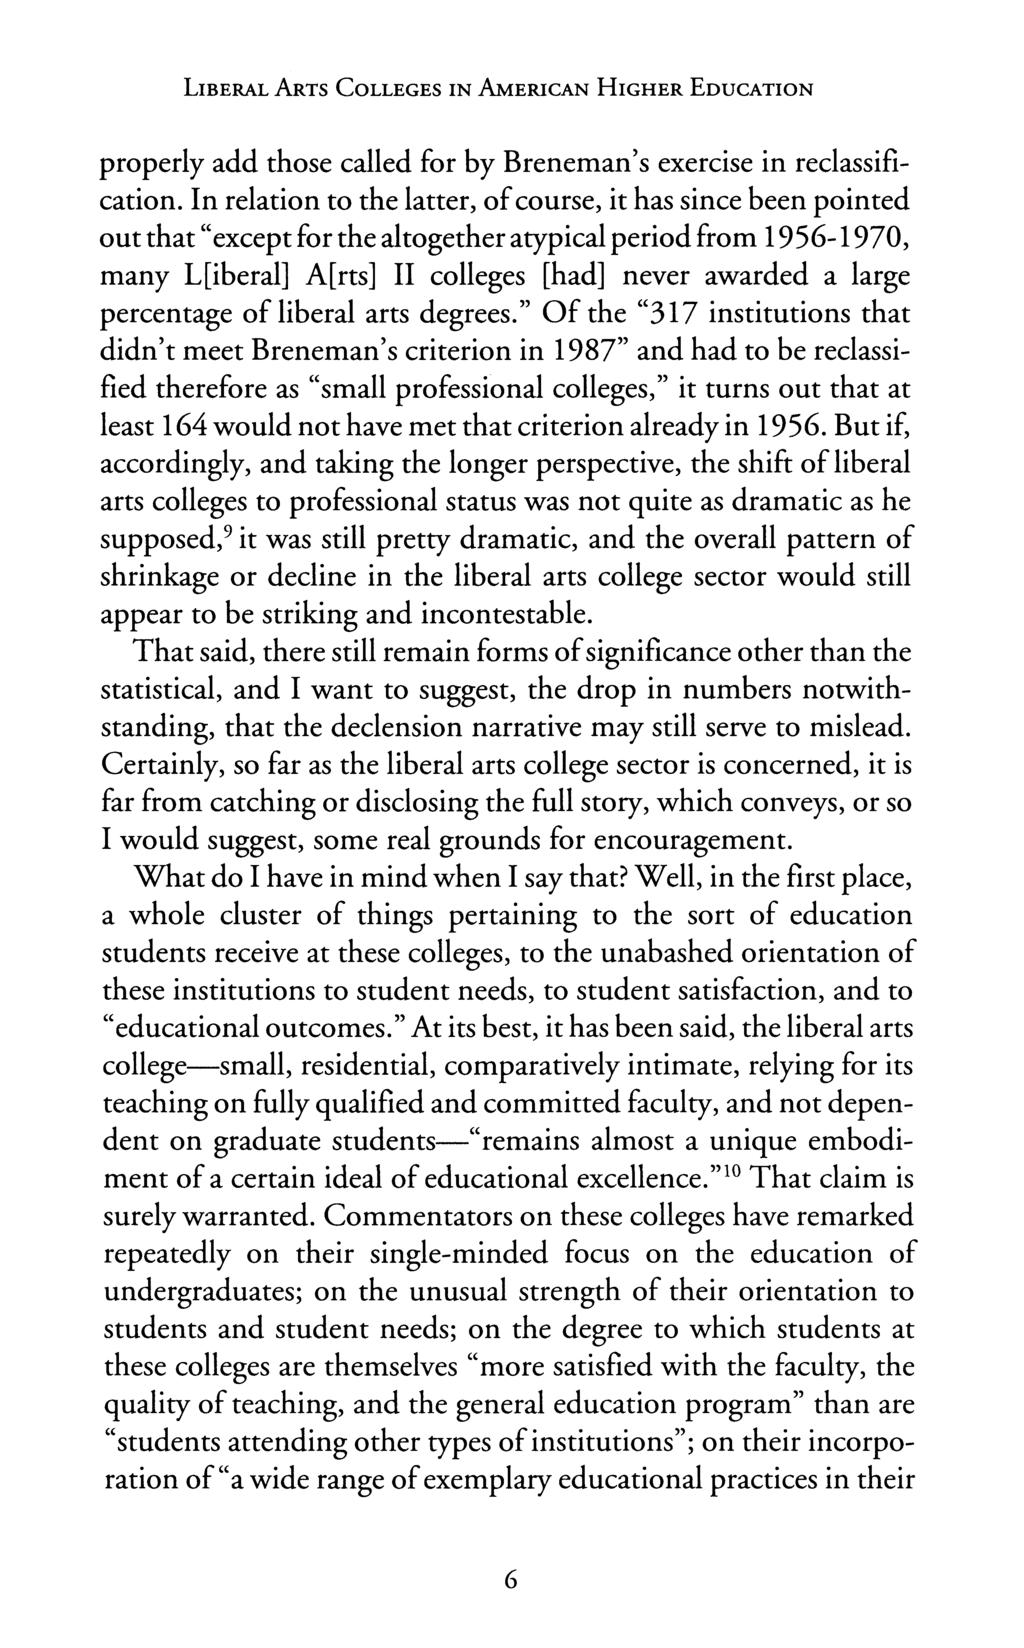 LIBERAL ARTS COLLEGES IN AMERICAN HIGHER EDUCATION properly add those called for by Breneman's exercise in reclassification.